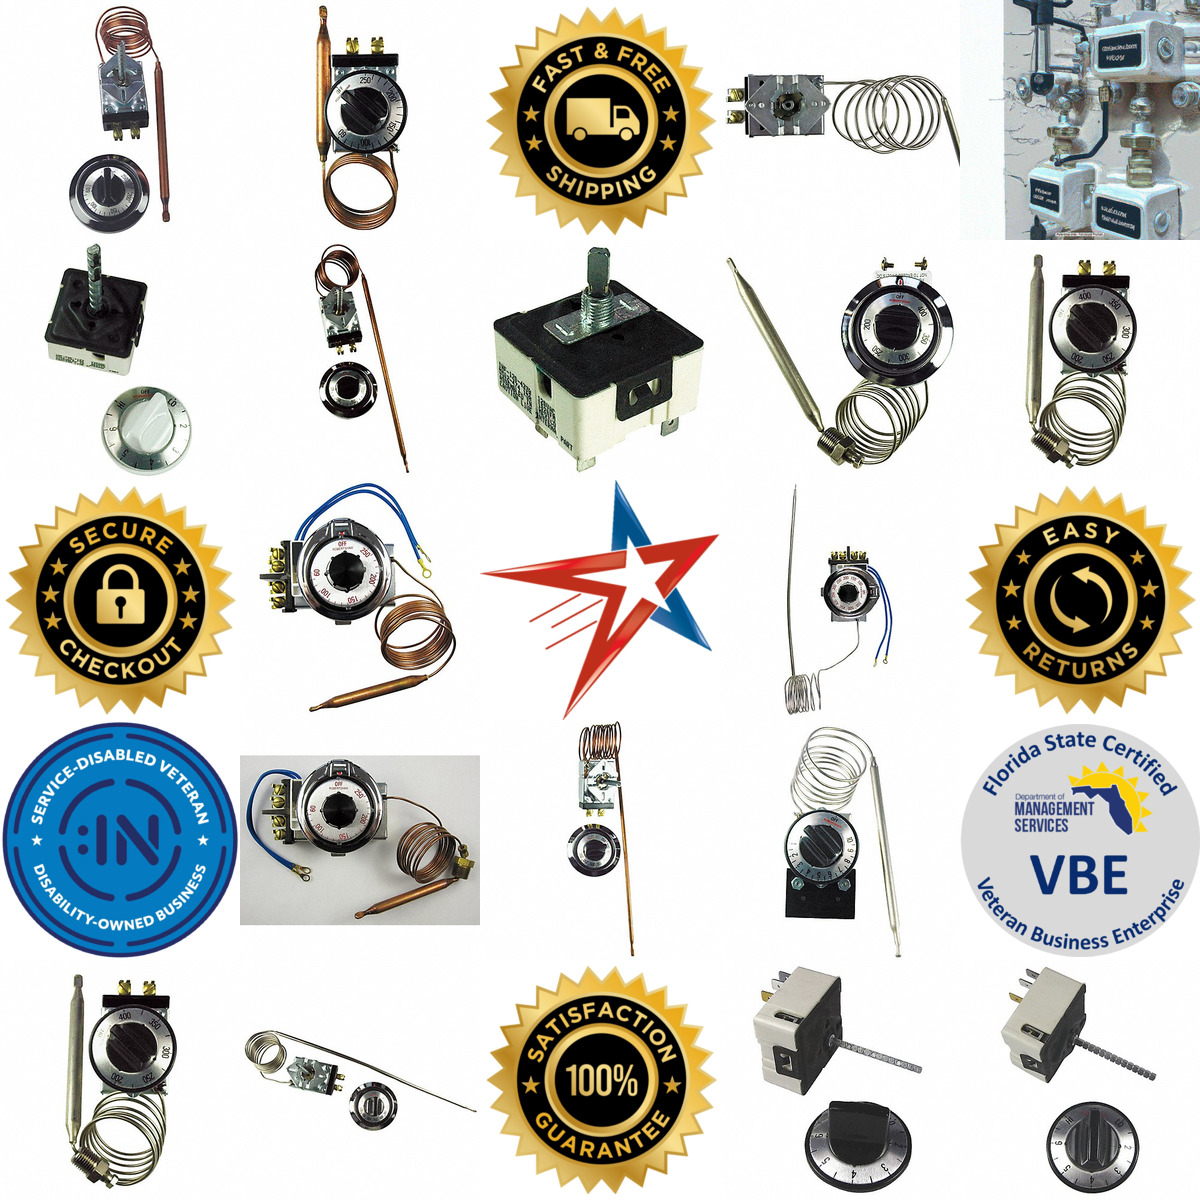 A selection of Electric Appliance Controls products on GoVets